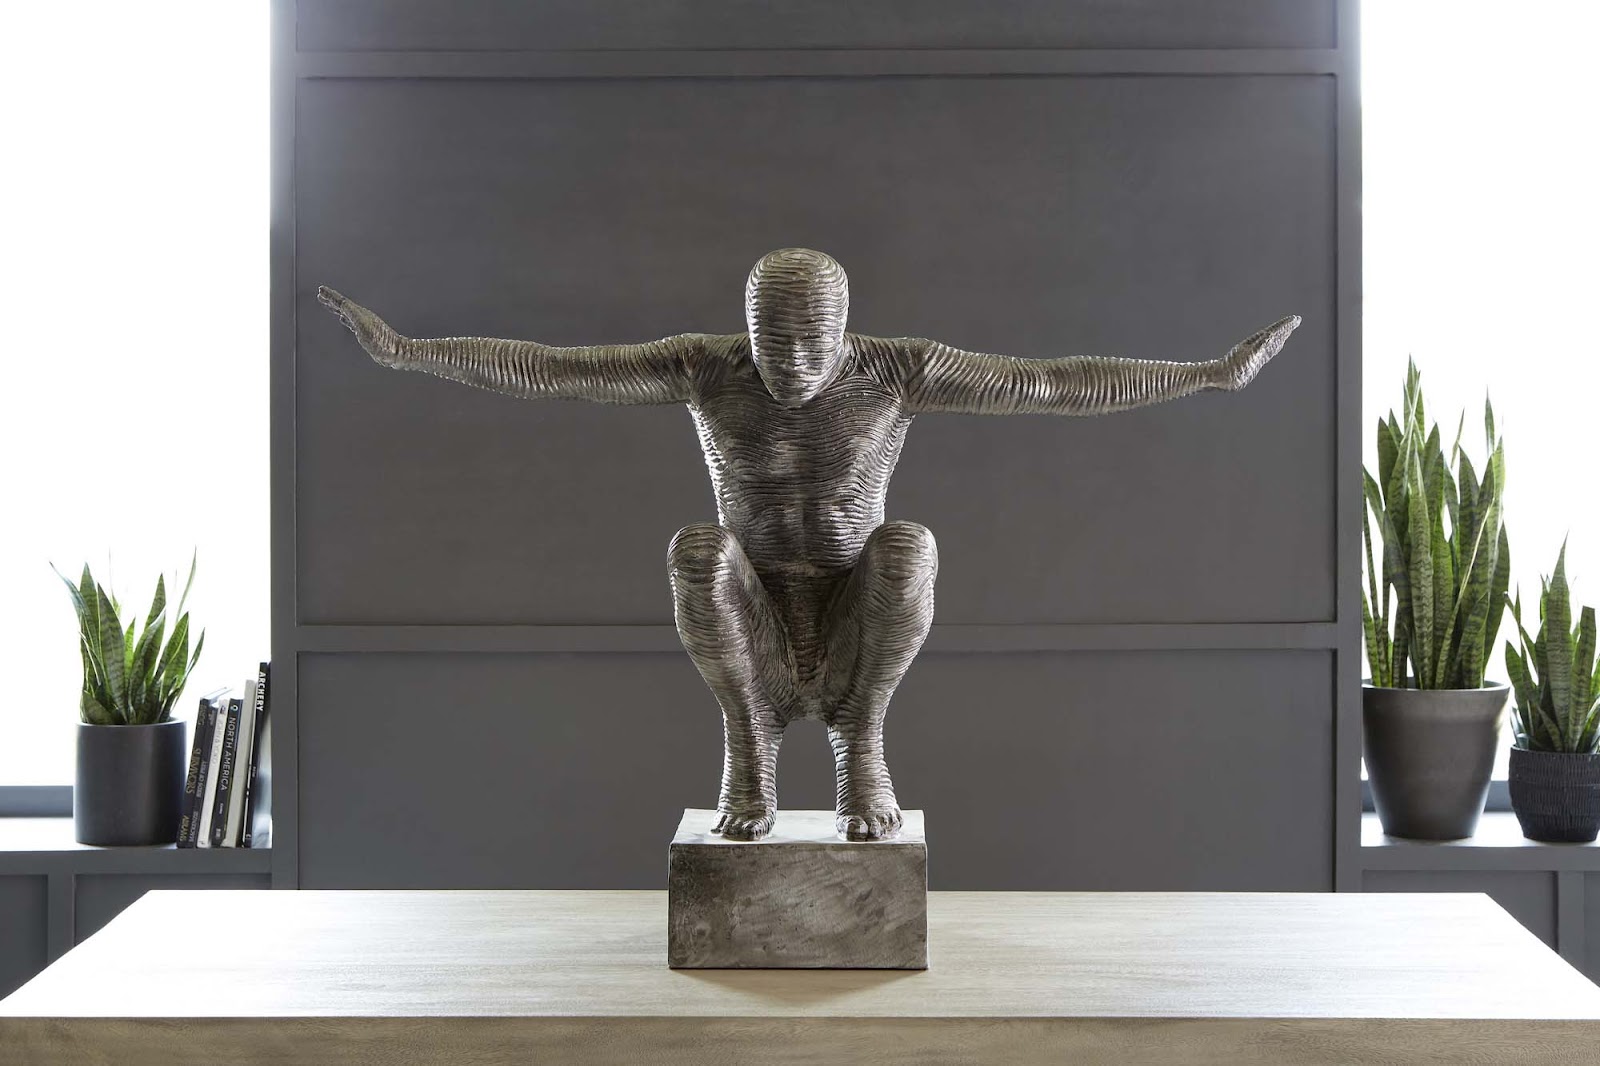 How to Add Sculpture Into Your Interior Design - Luxe Home Interiors